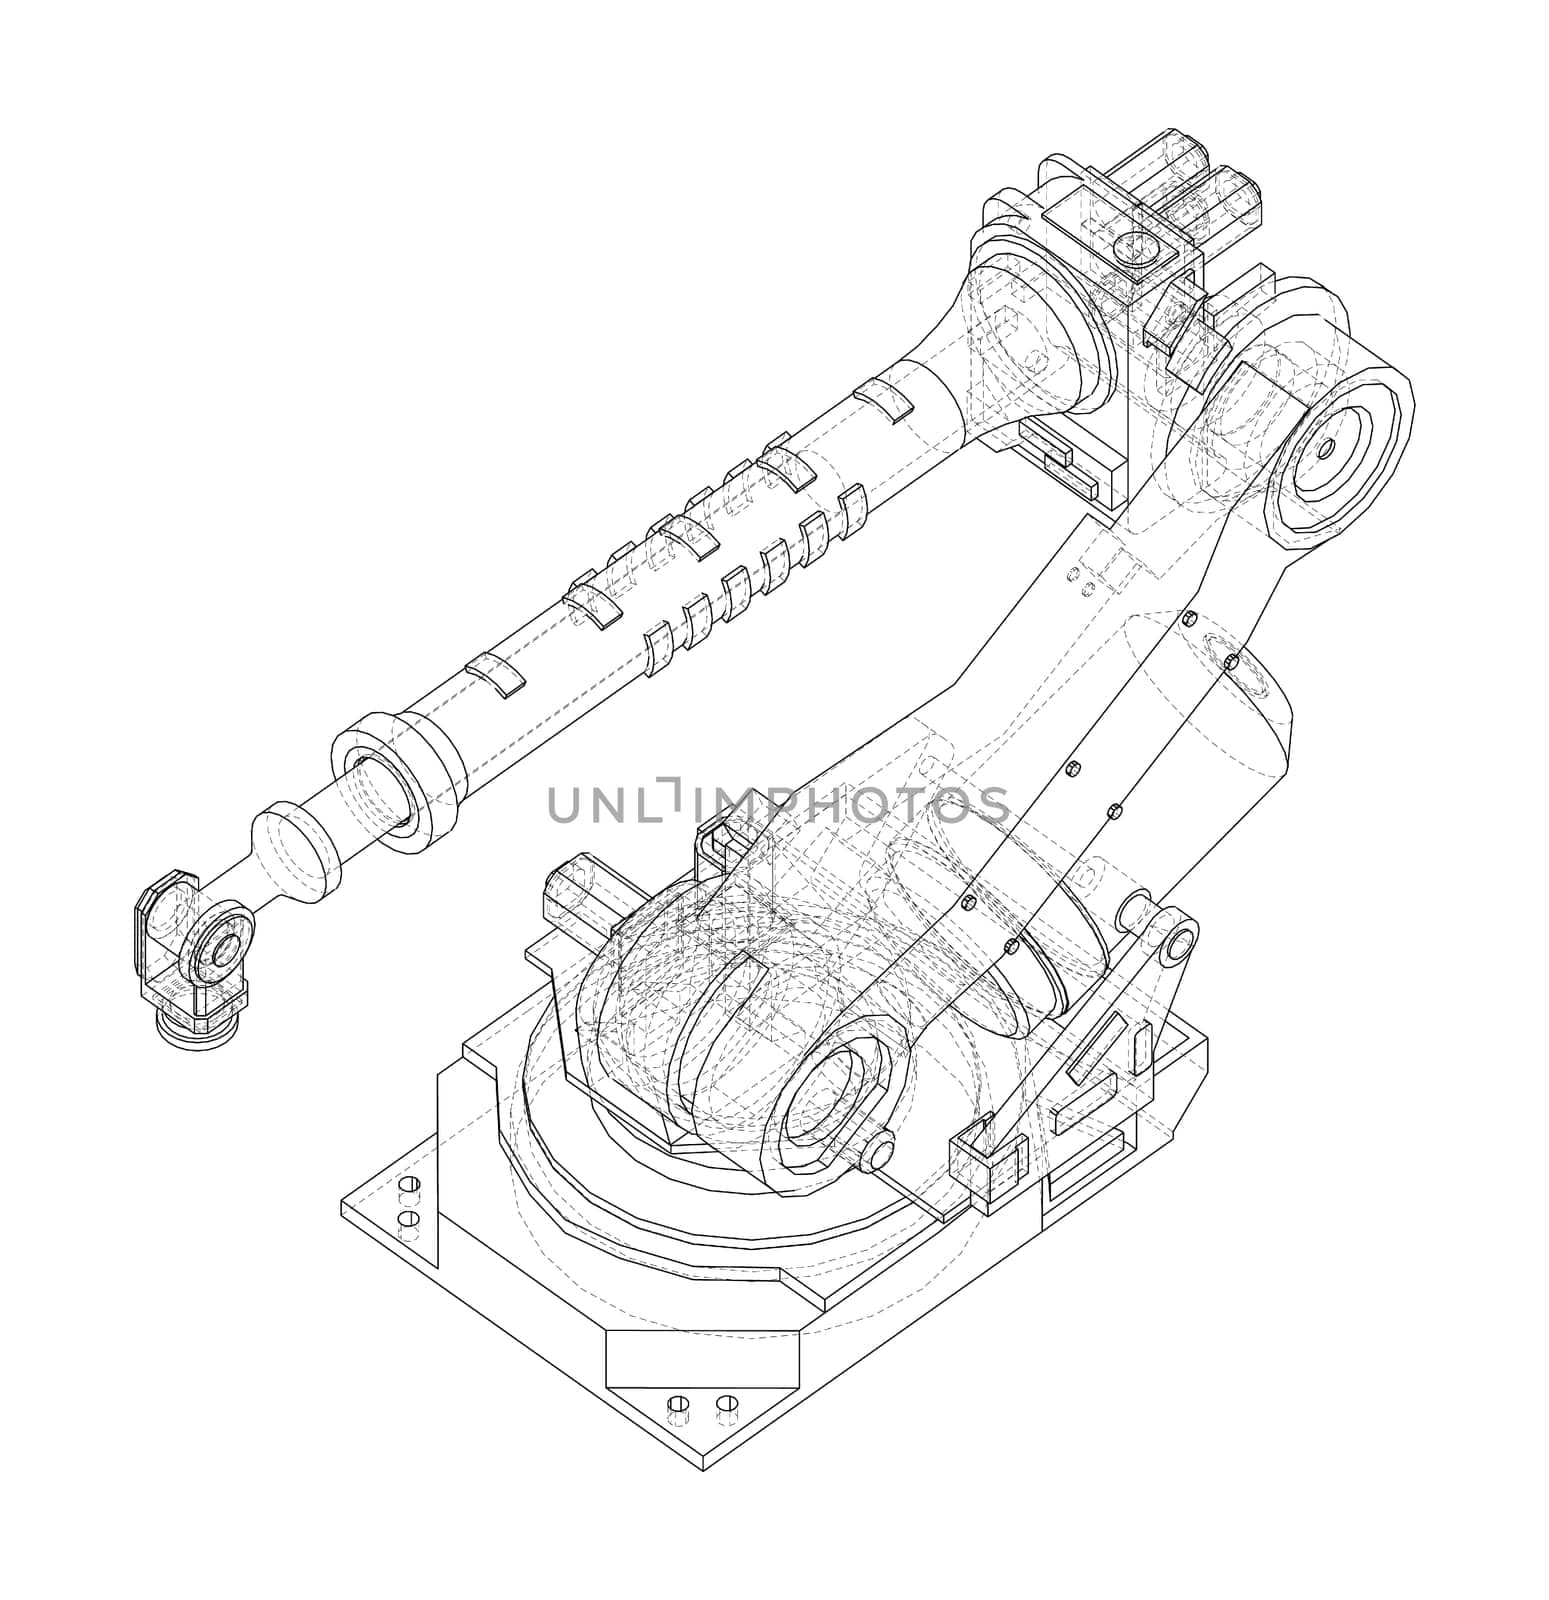 Industrial Robotic Arm. 3d illustration. Wire-frame style. Orthography